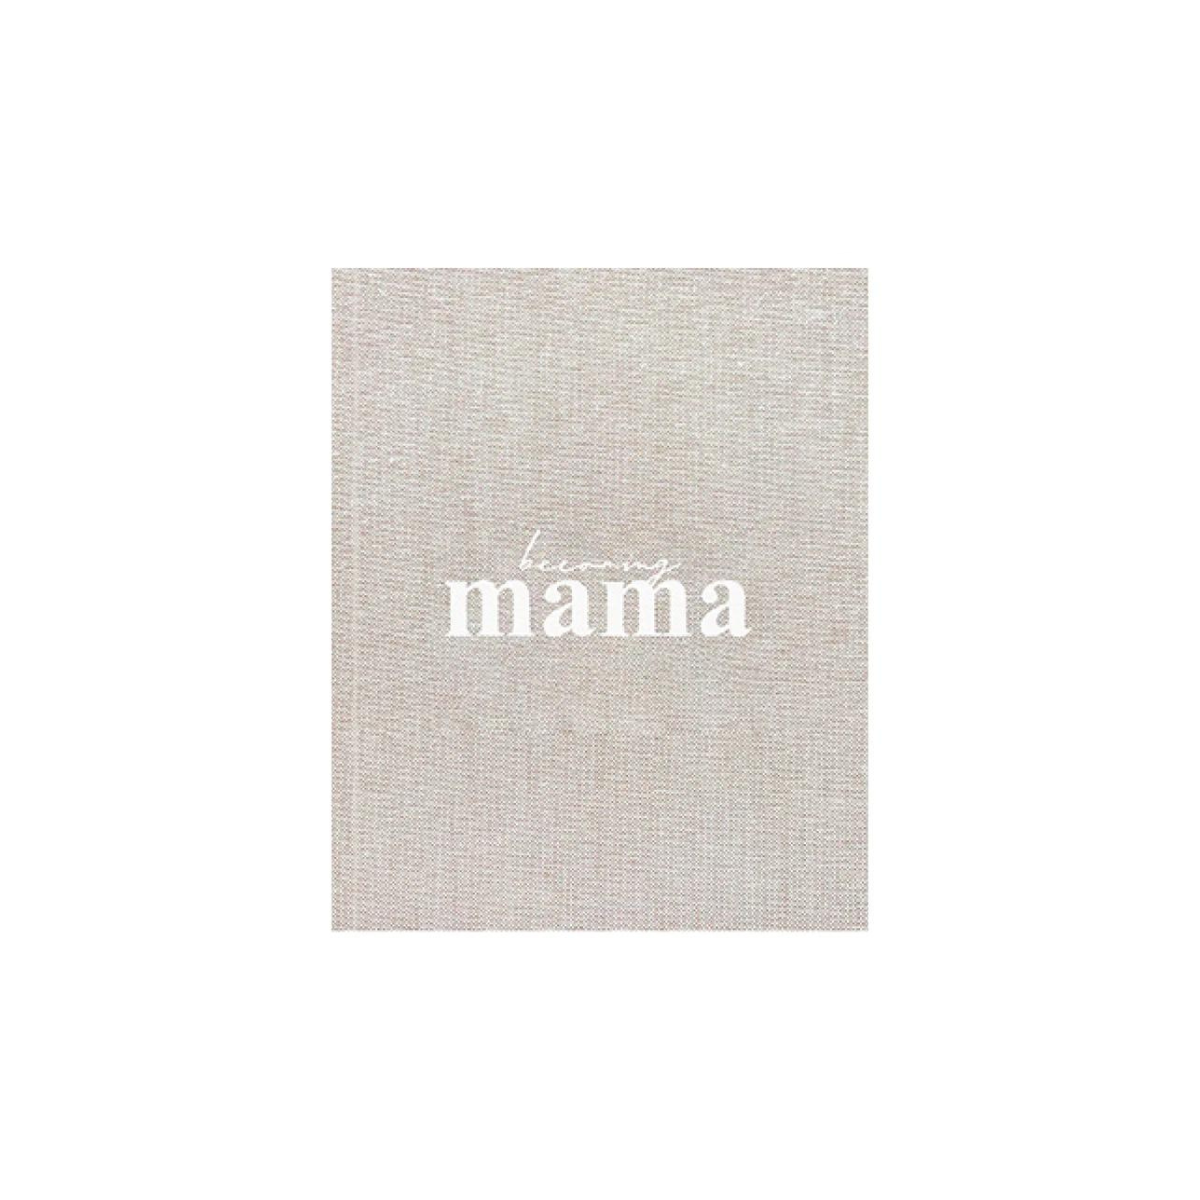 Becoming MAMA - A pregnancy journal